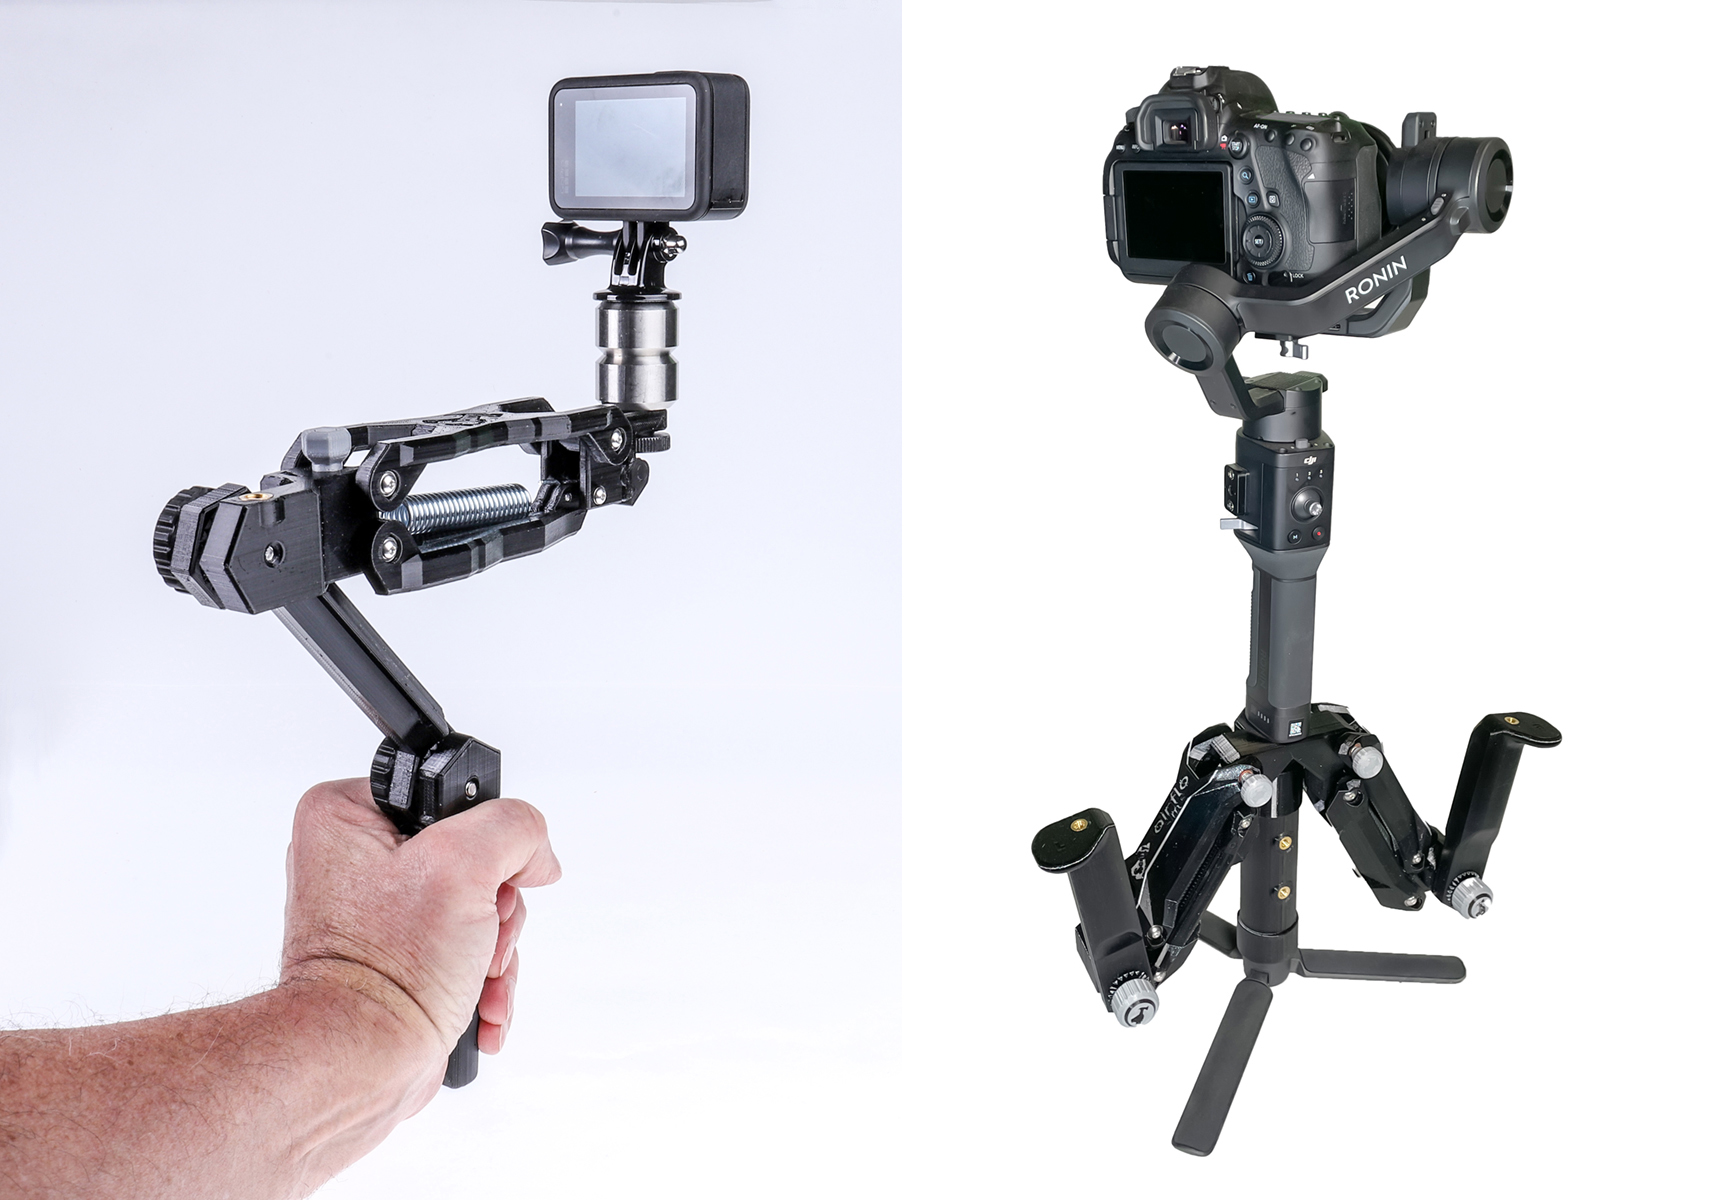 Scotty Makes Stuff Z-axis Stabilizers Hands-On 10